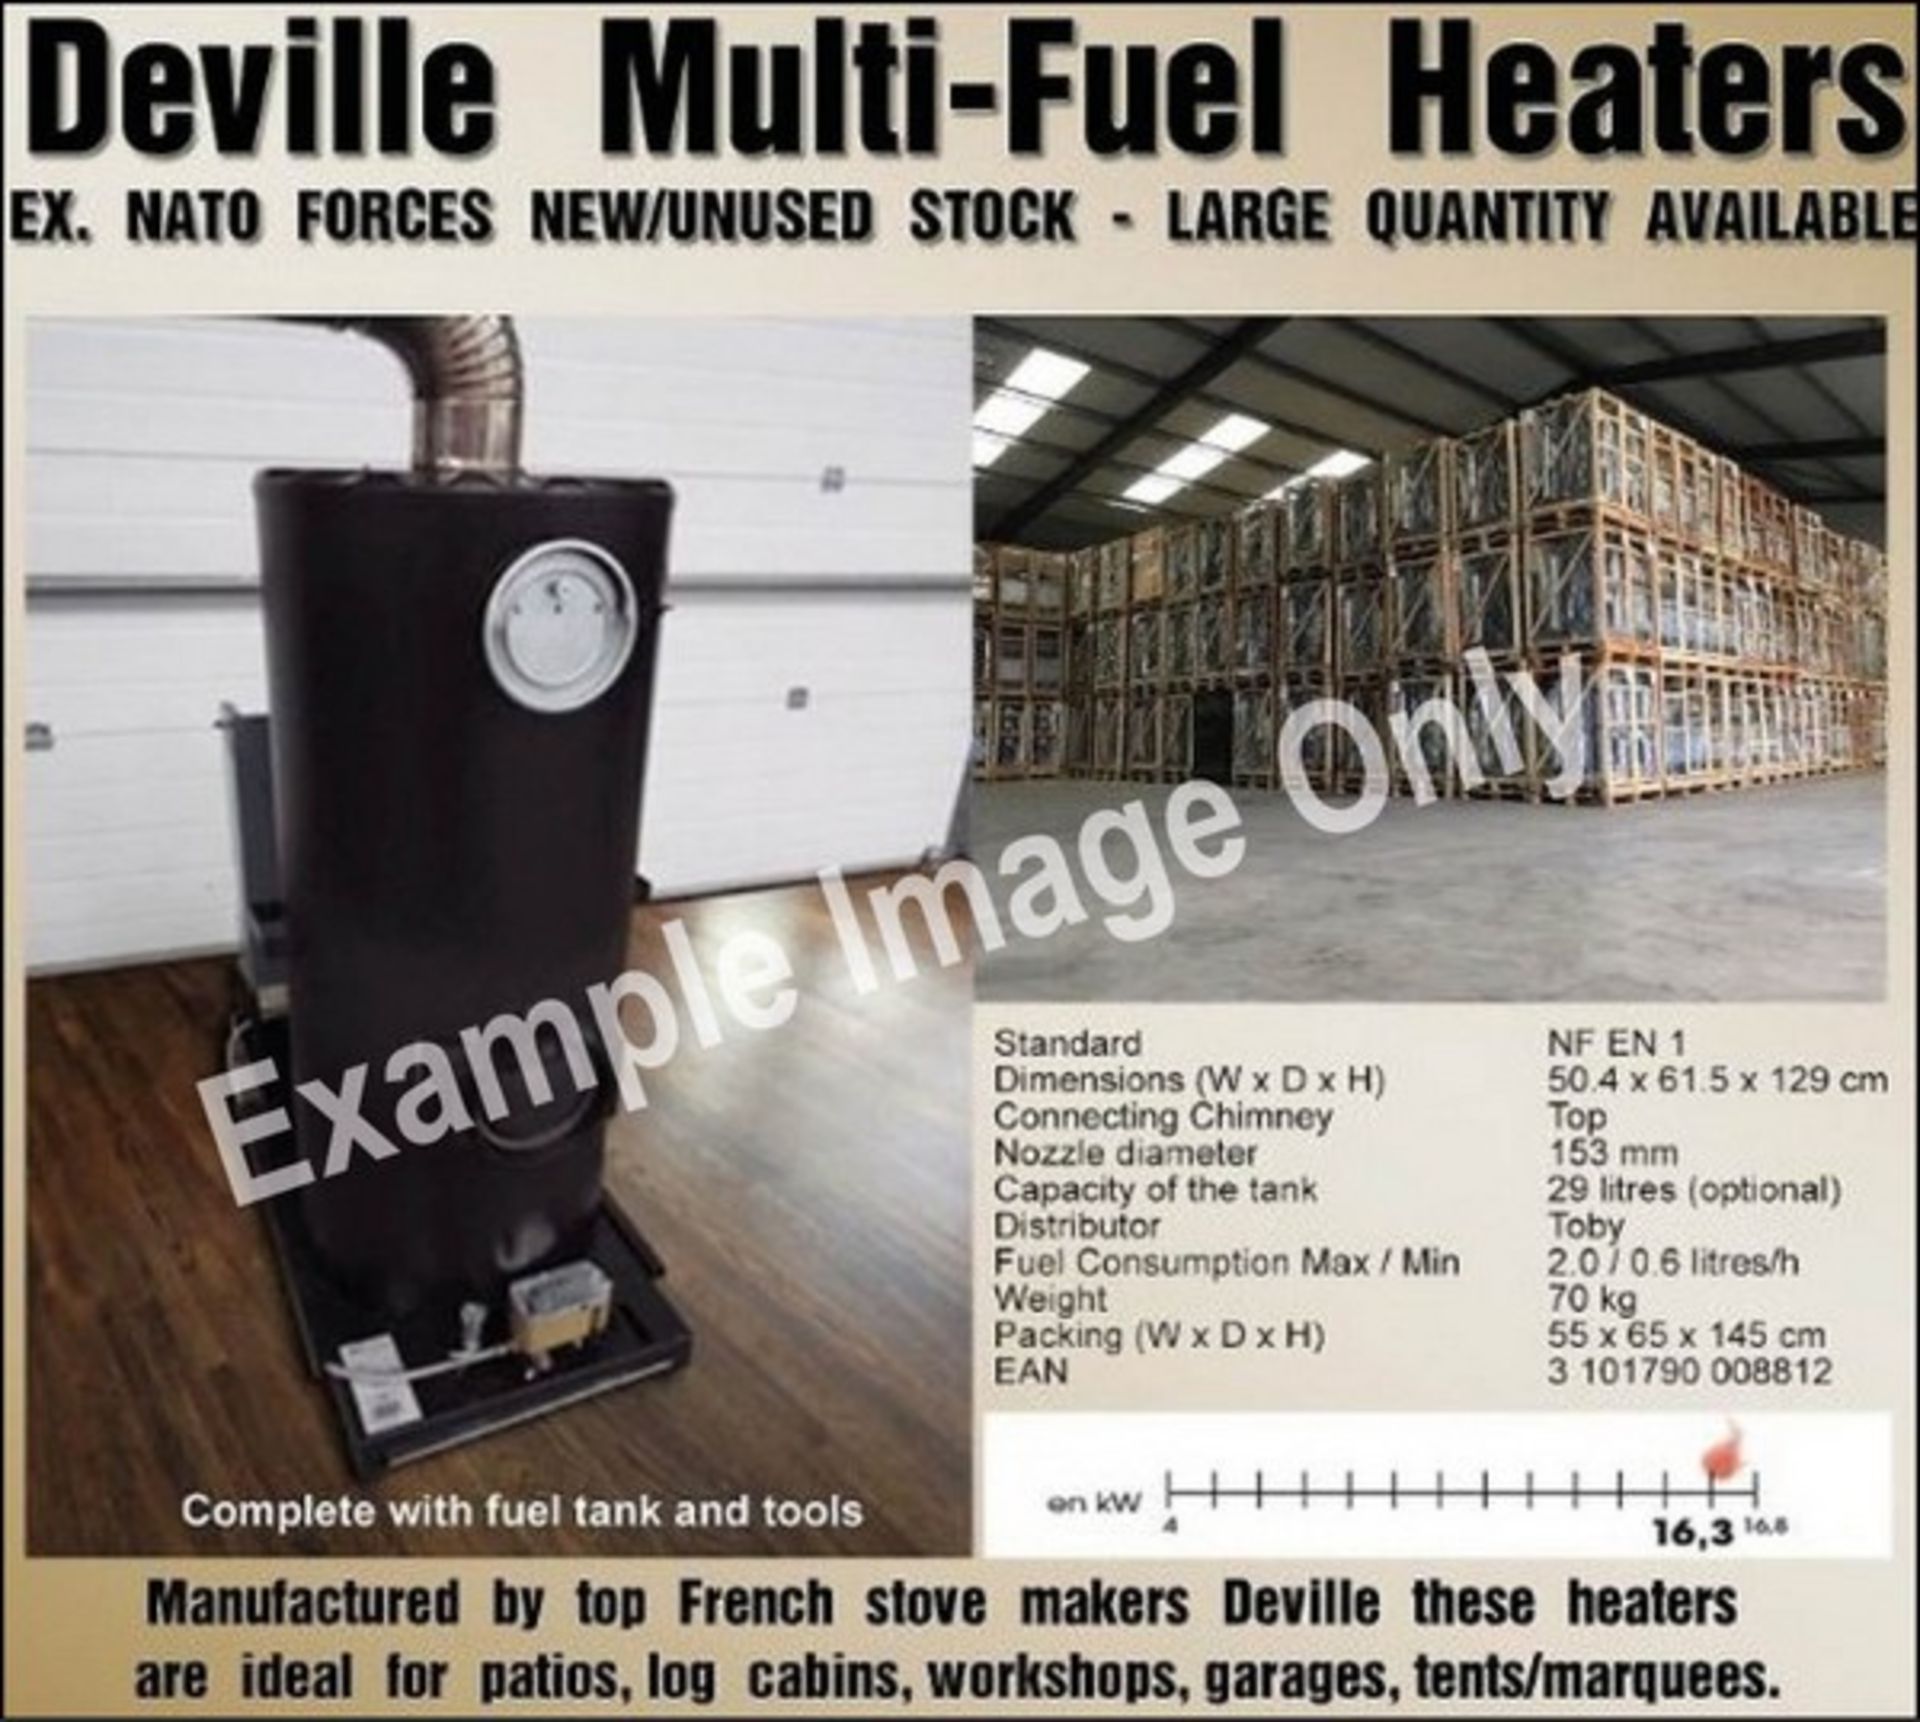 2 x DEVILLE multi-fuel heaters on pallet. Image example only.